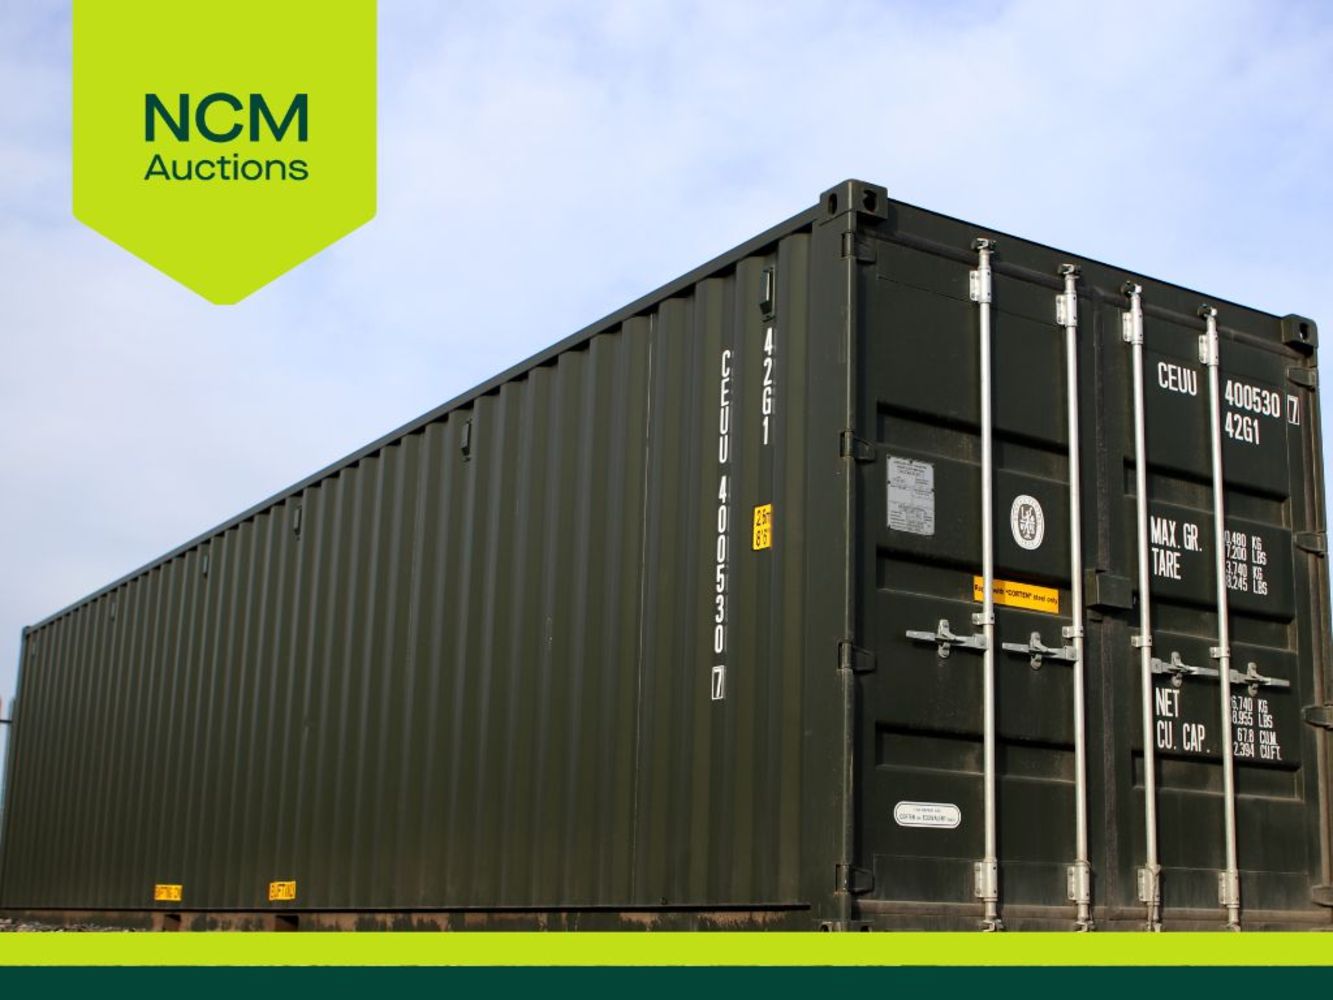 Plant, Machinery & Commercial Vehicles - Featuring 40ft High Cube Shipping Containers, Industrial Forklifts, Telehandlers & Commercial Vehicles.